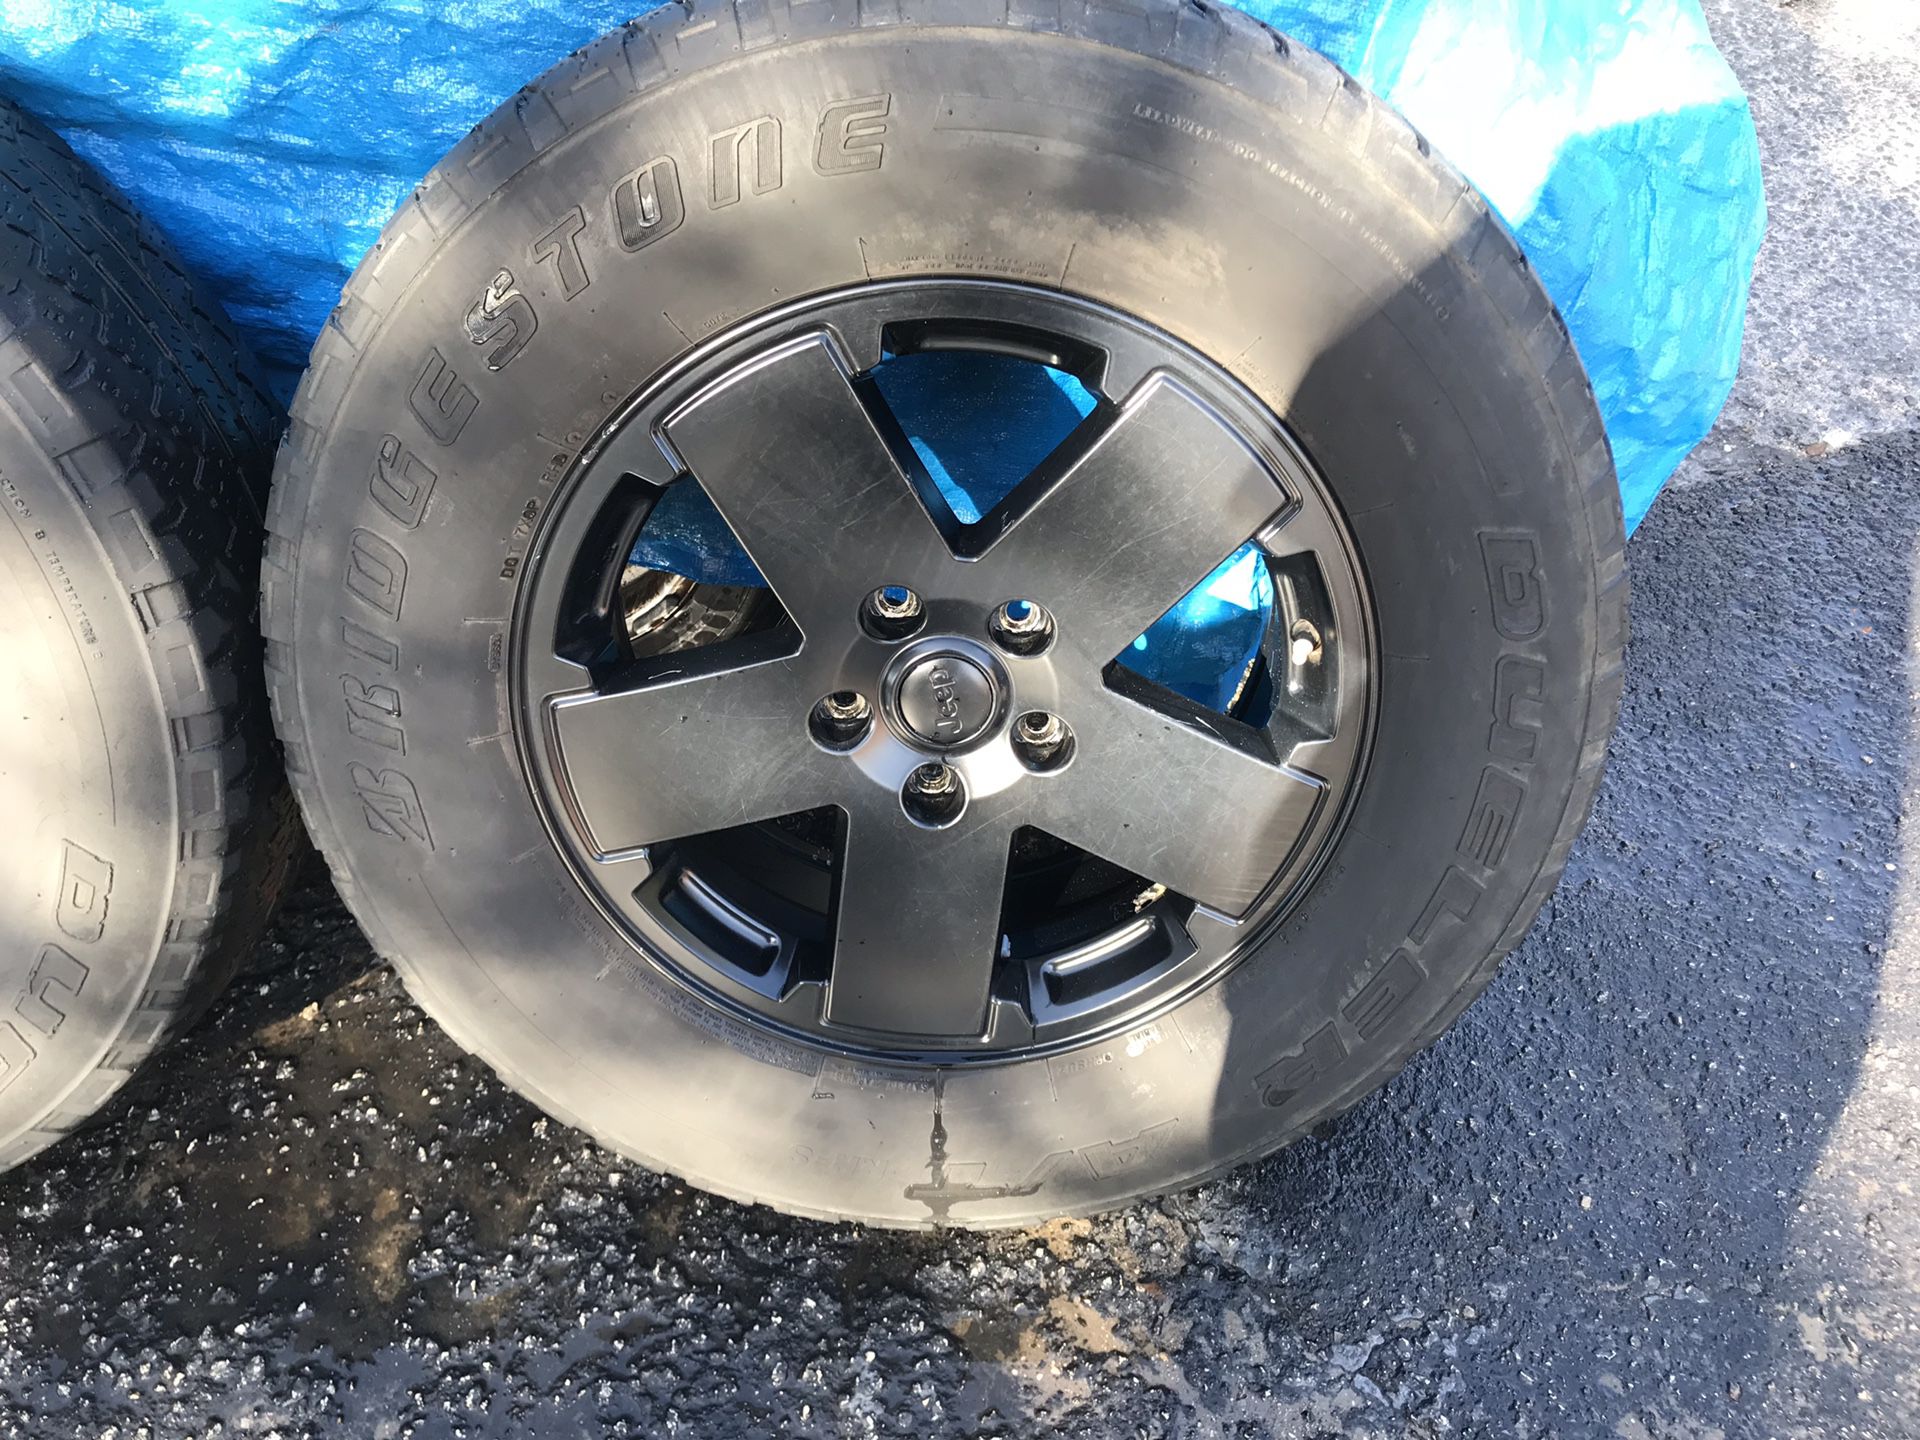 Jeep Wrangler wheels with tires